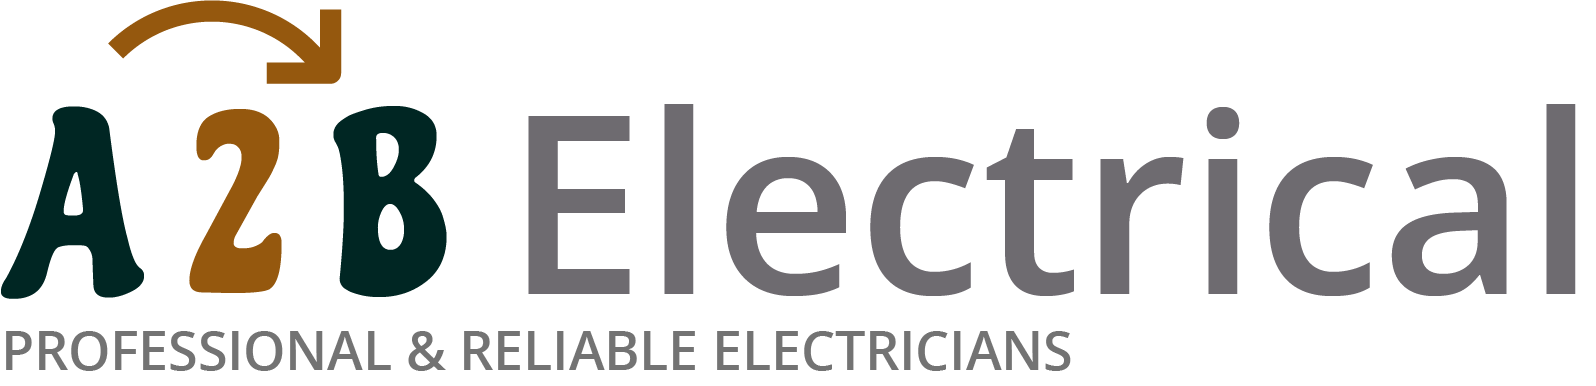 If you have electrical wiring problems in Greenwich, we can provide an electrician to have a look for you. 